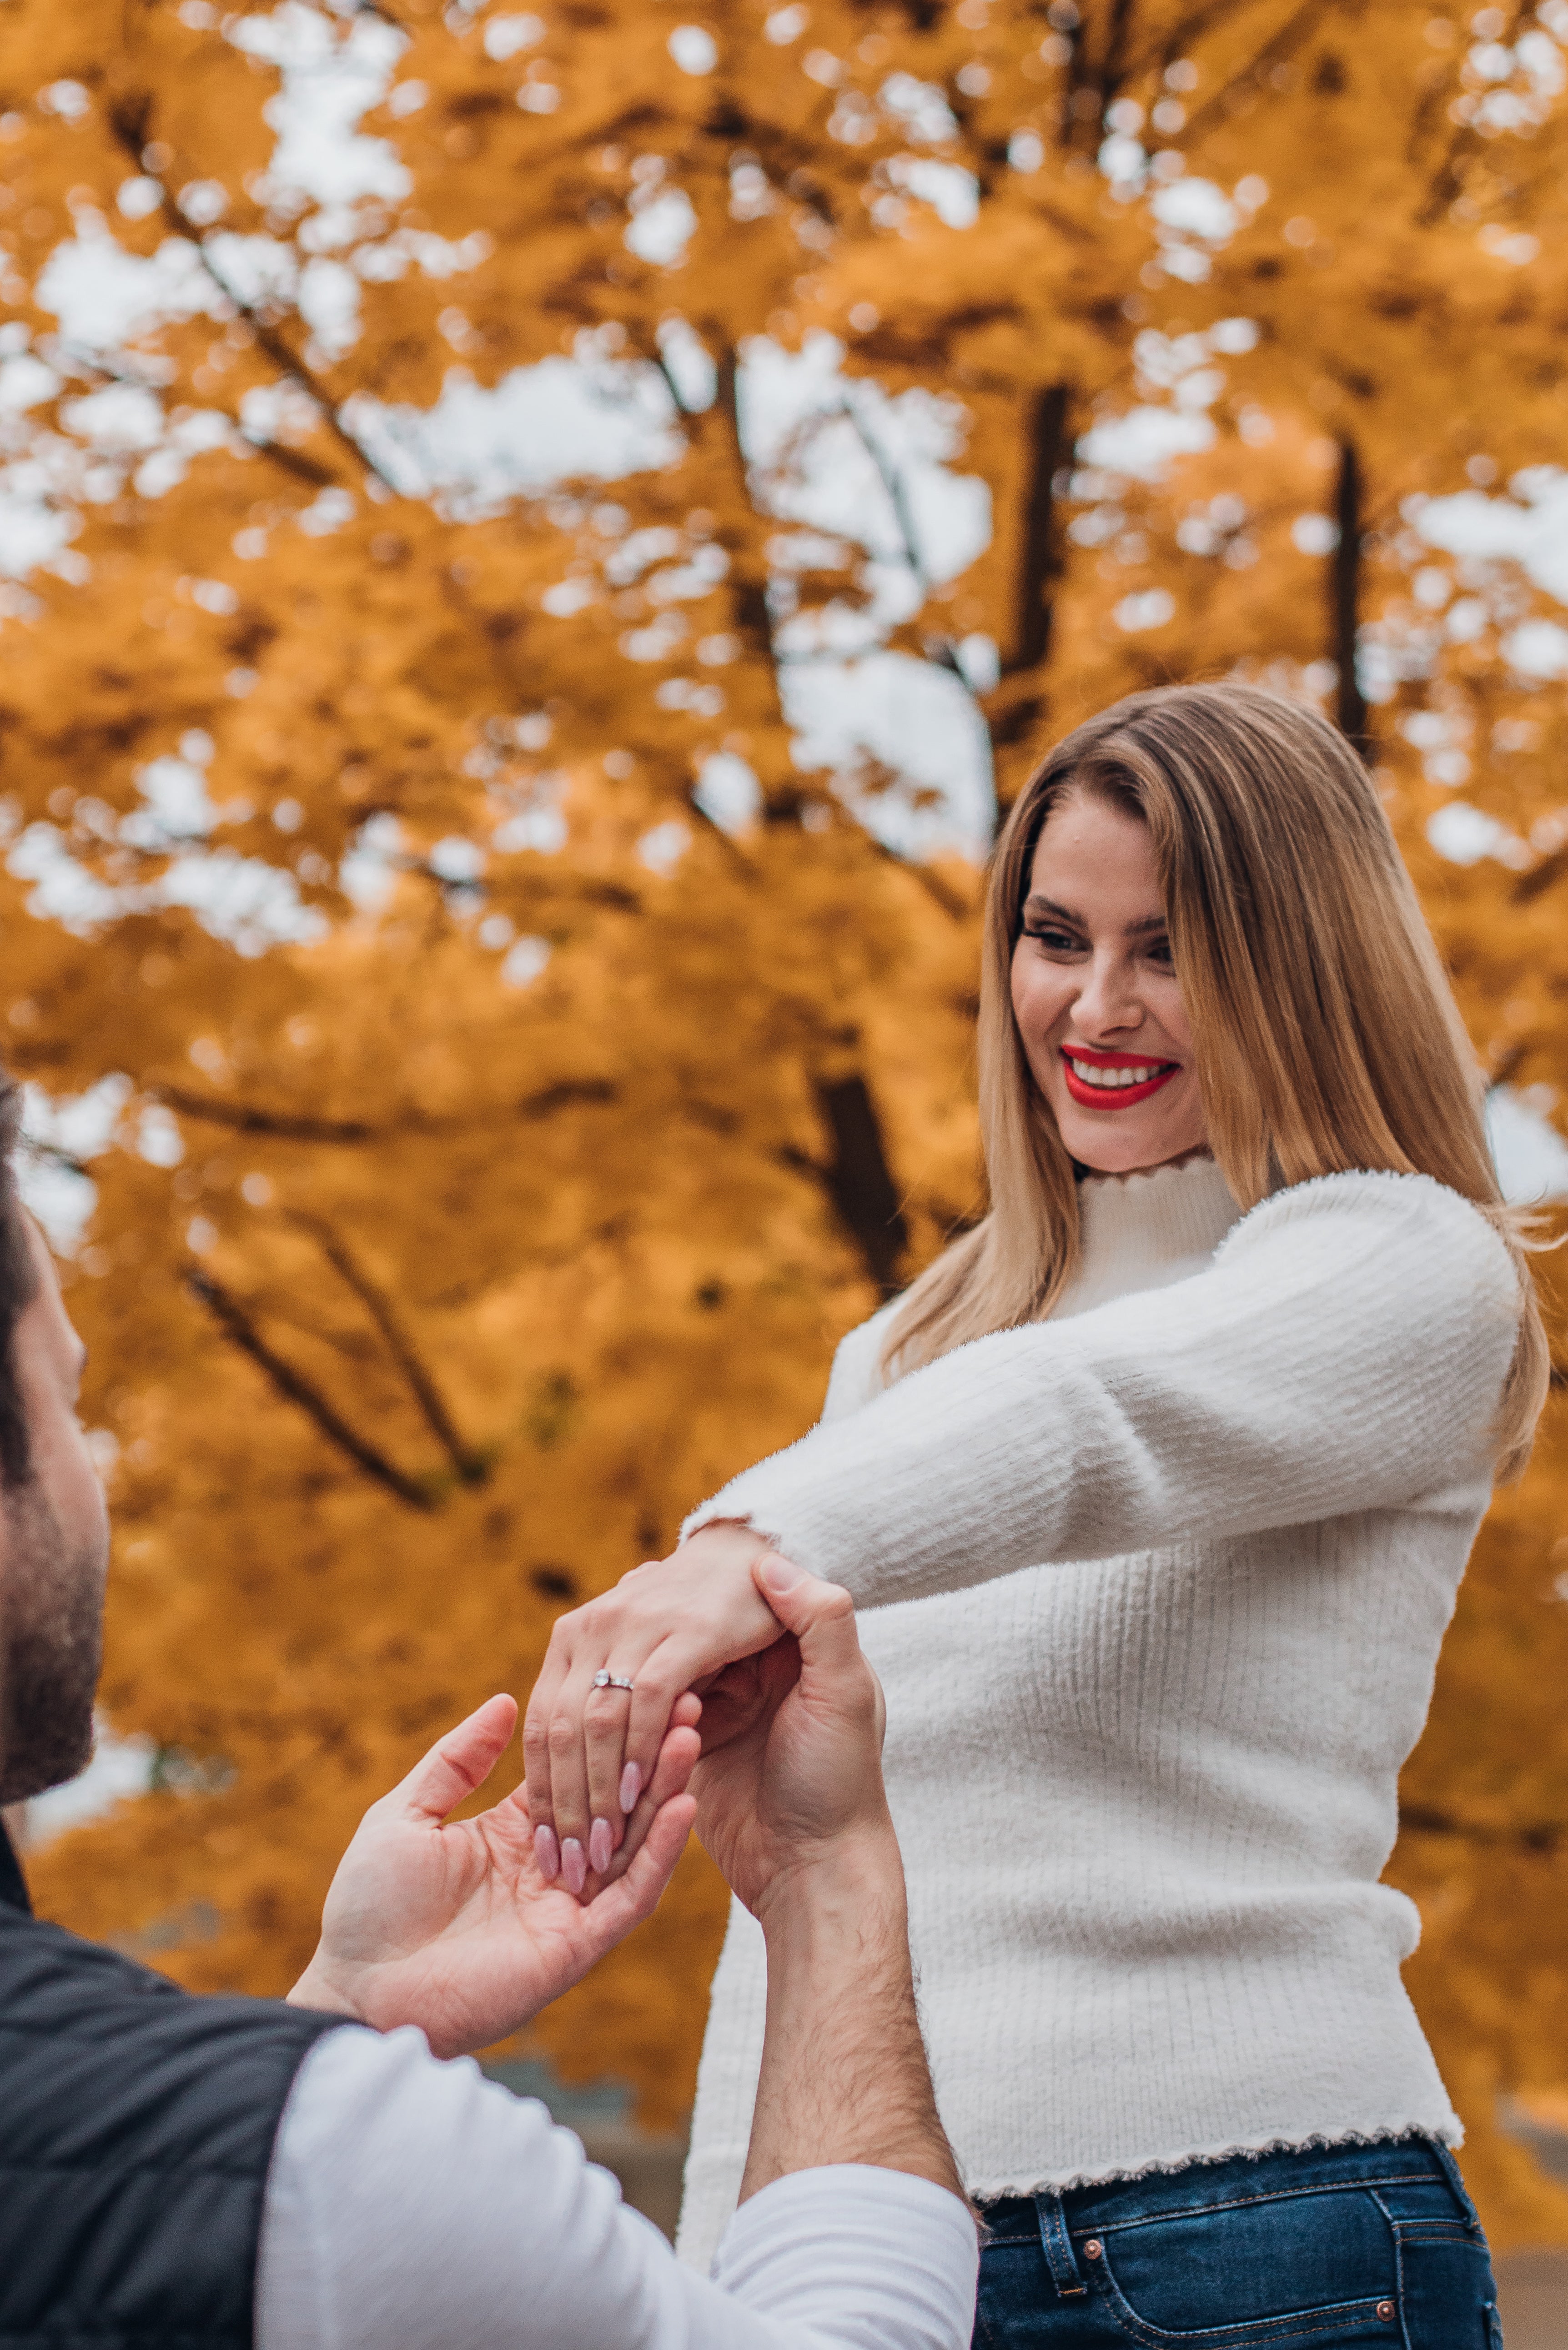 5 Romantic Proposal Ideas for Fall 2020